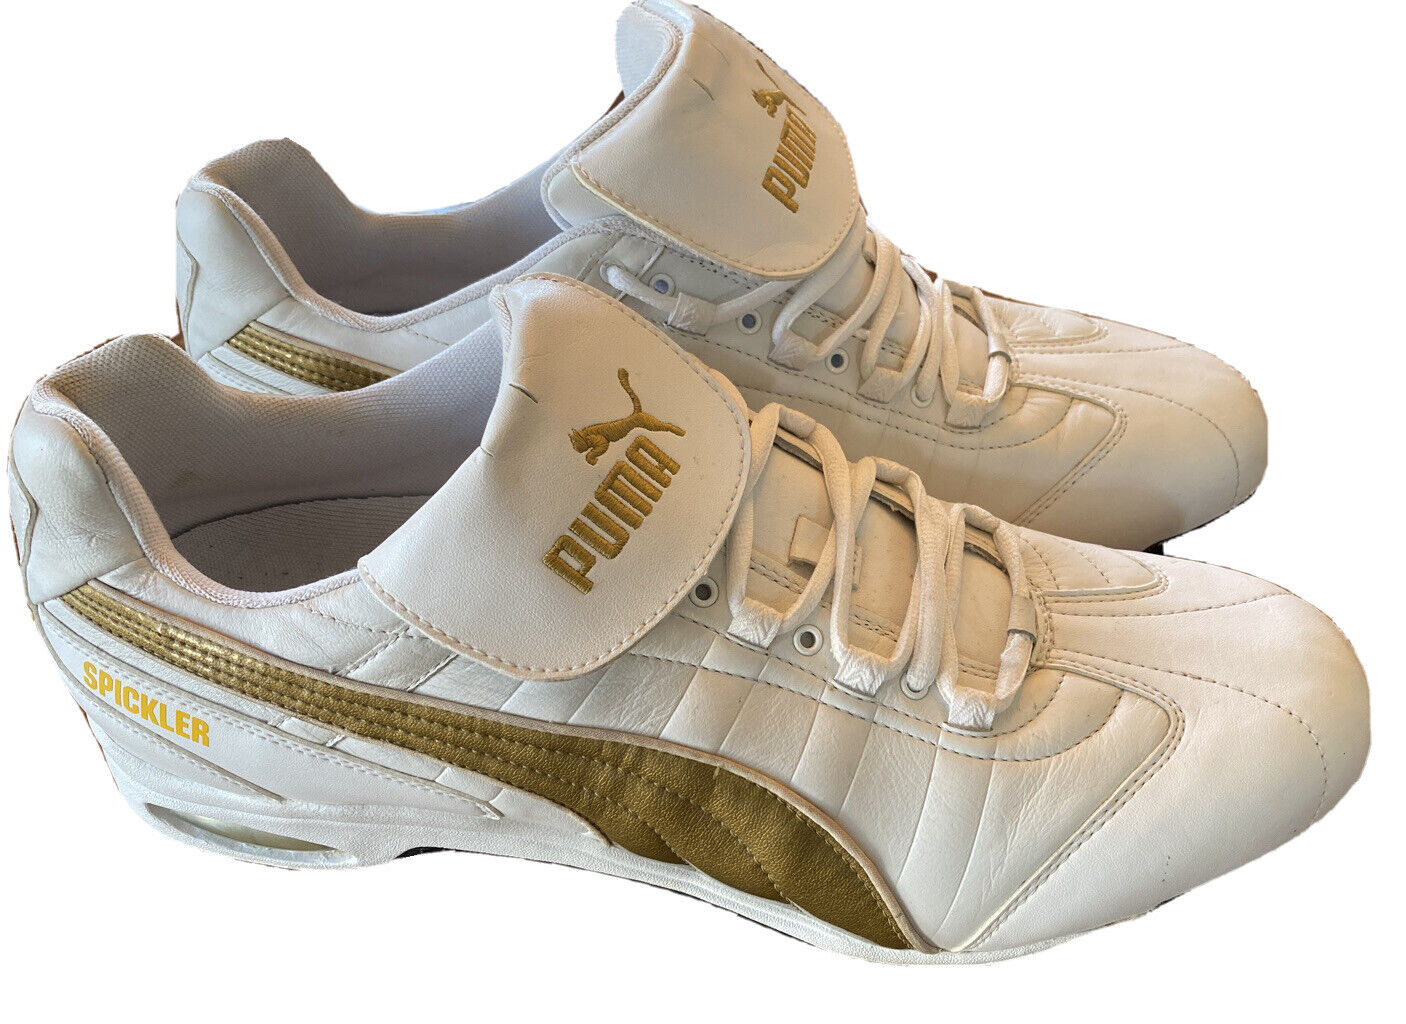 Puma Free shipping Baseball Cleats Size 16 Gold Cell Duo White OFFicial shop CDT-0804 Flex